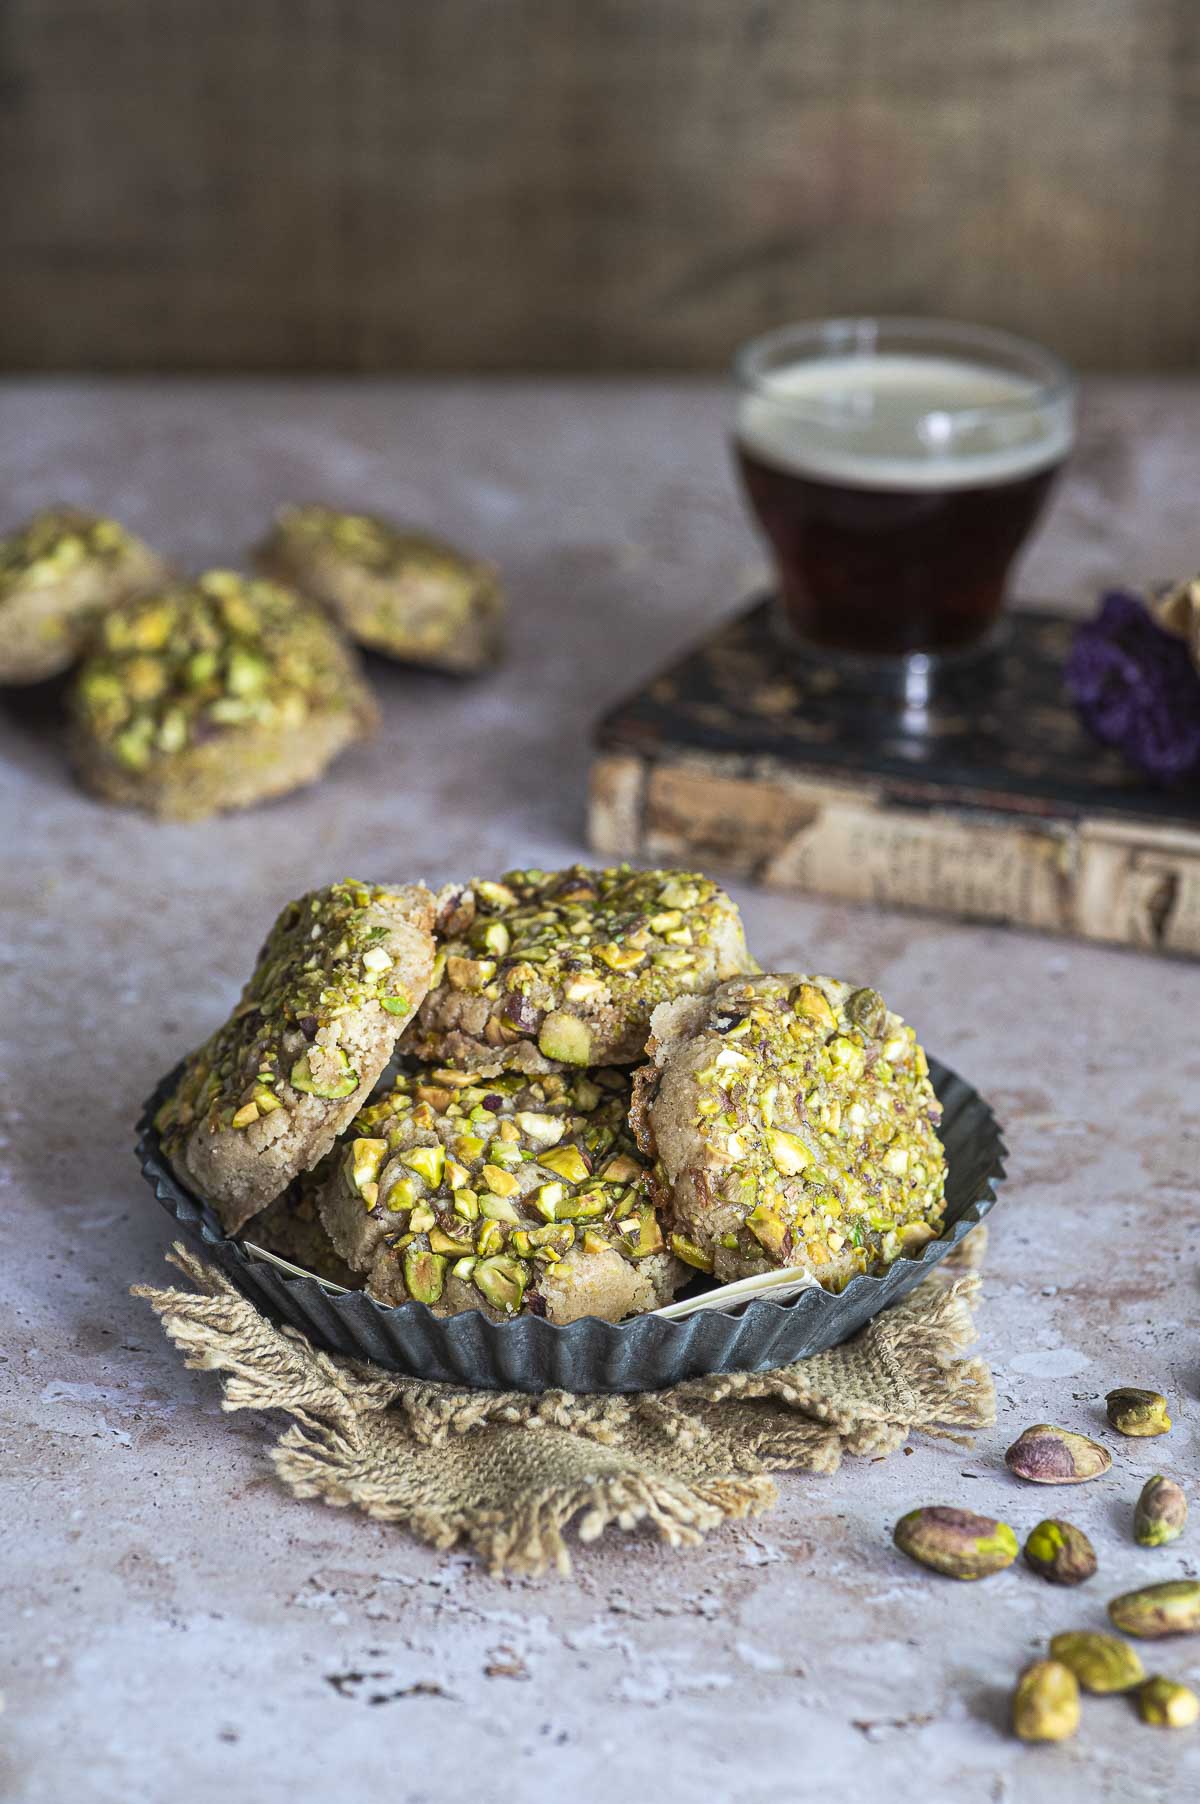 Side view of plate filled with pistachio cookies